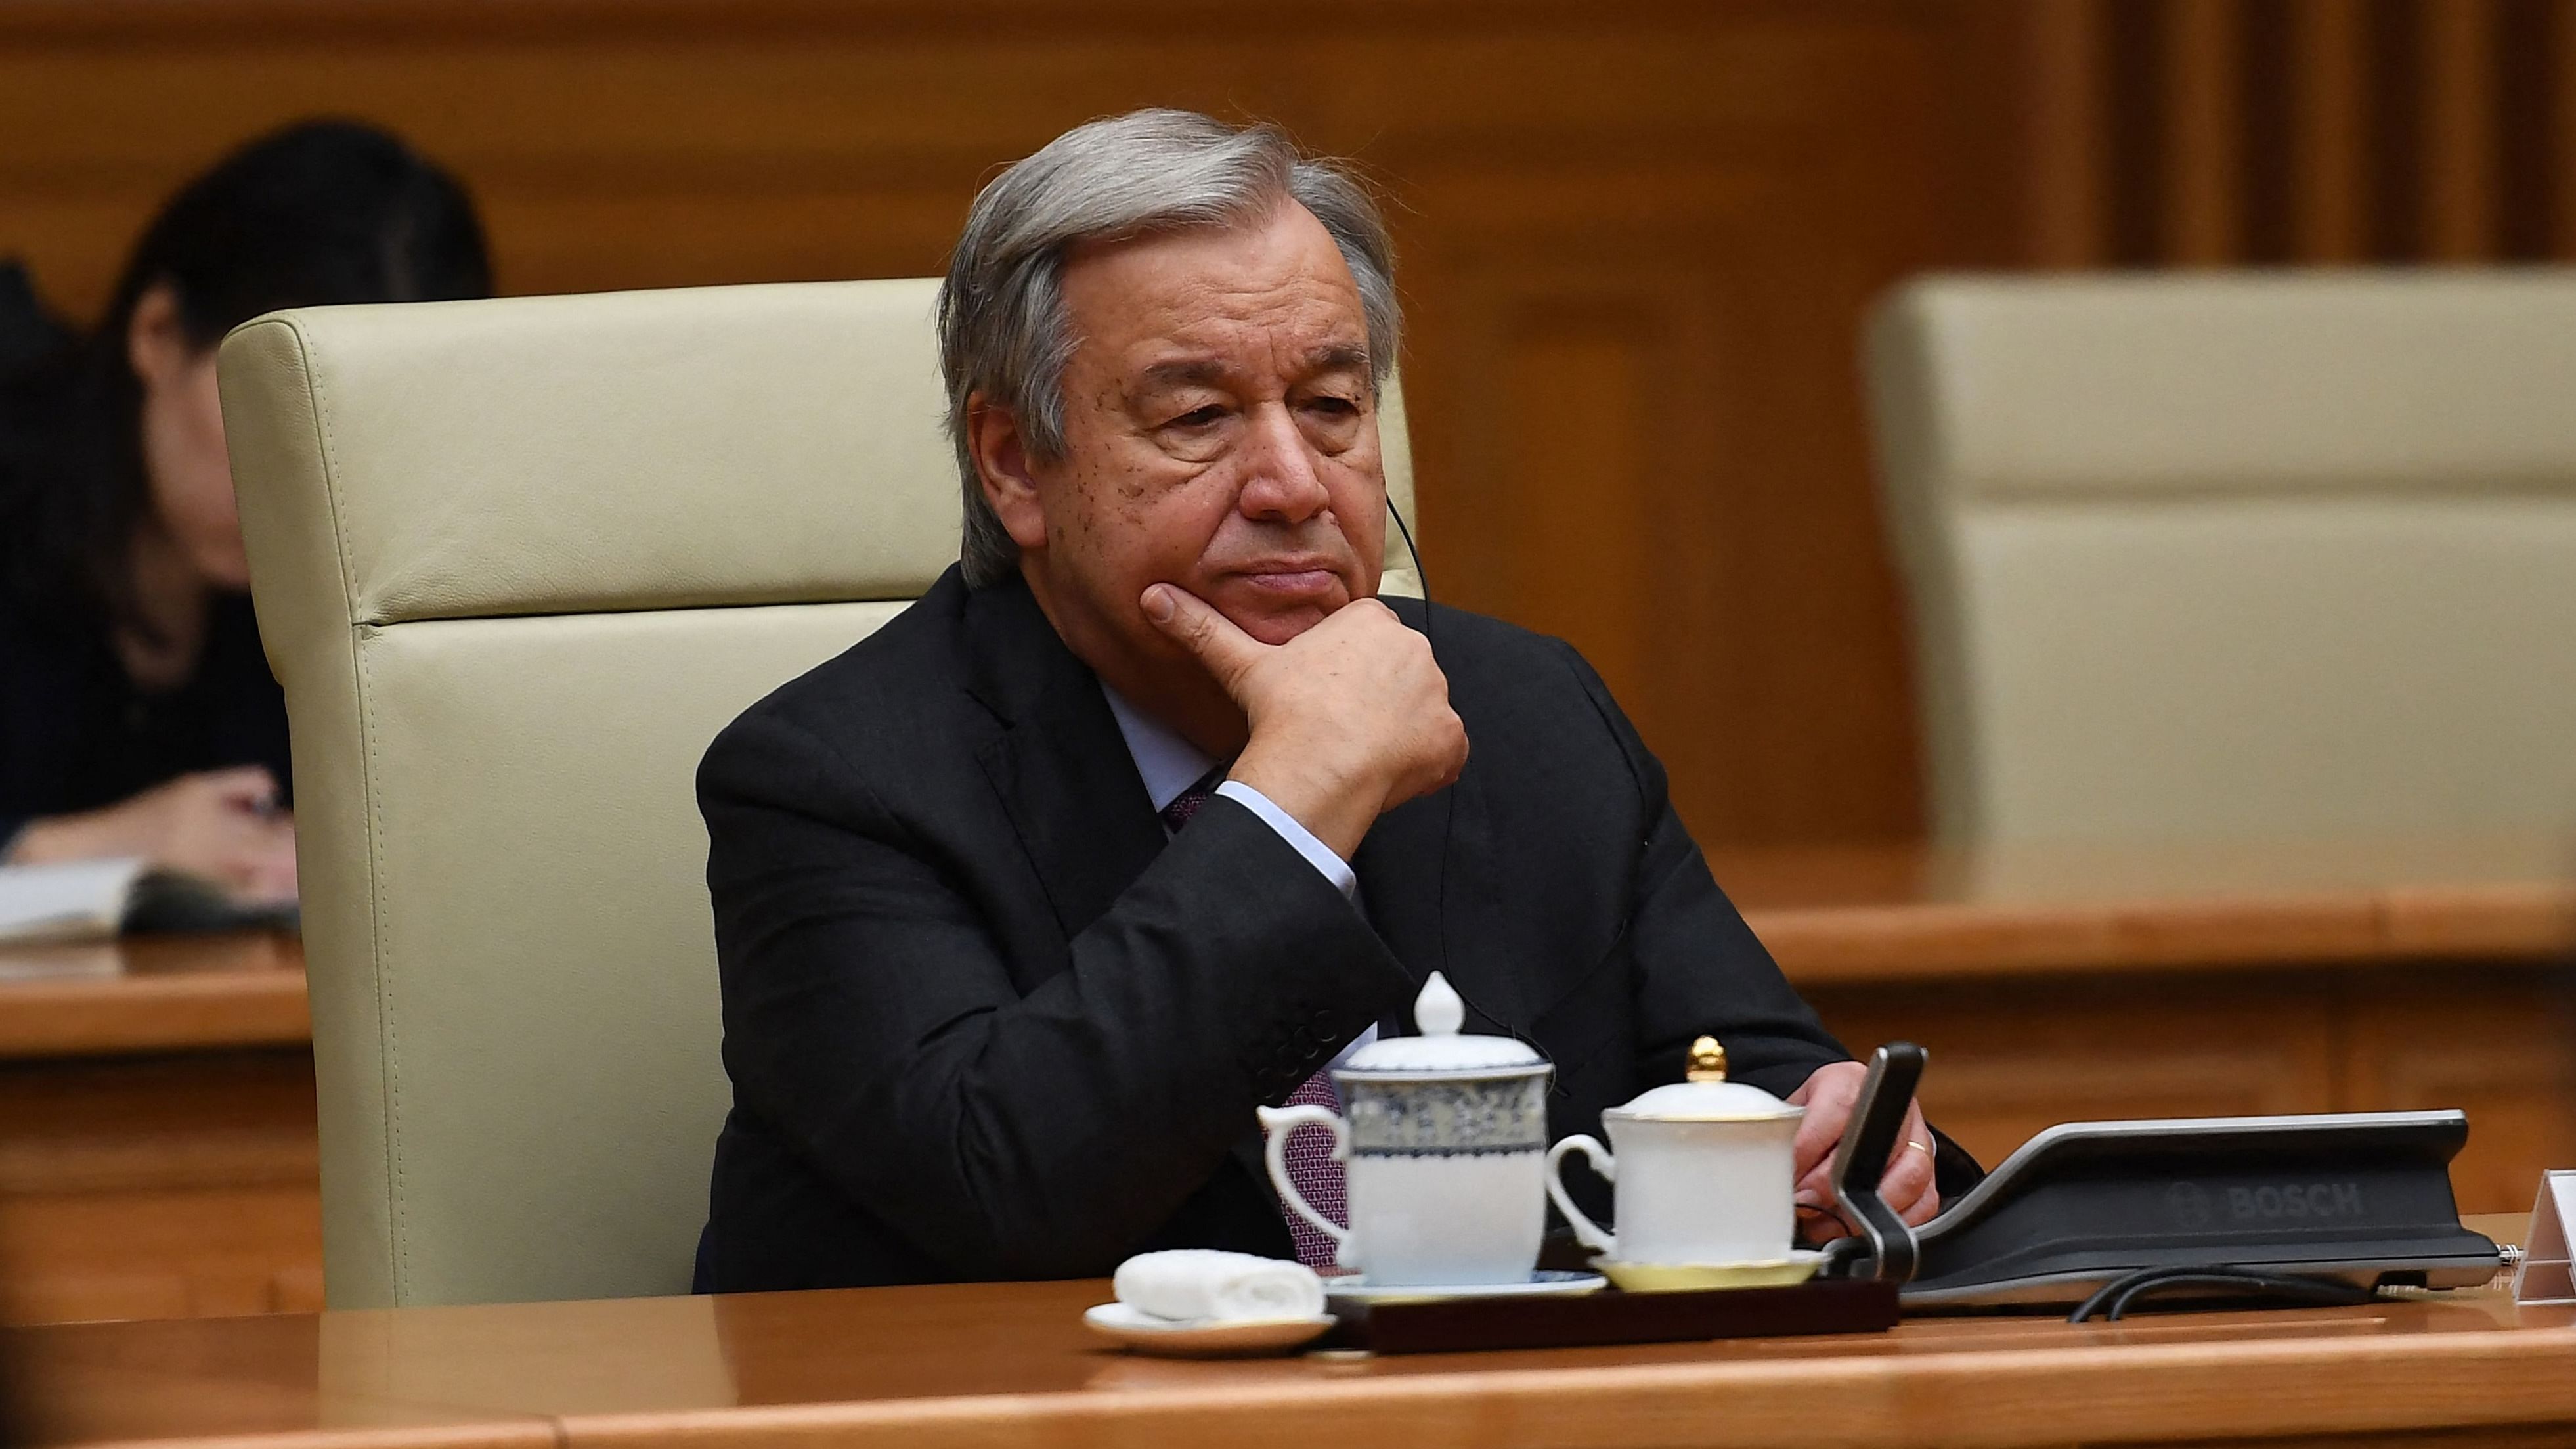 Guterres said the Covid-19 pandemic has highlighted many vulnerabilities to such misuse. Credit: AFP Photo